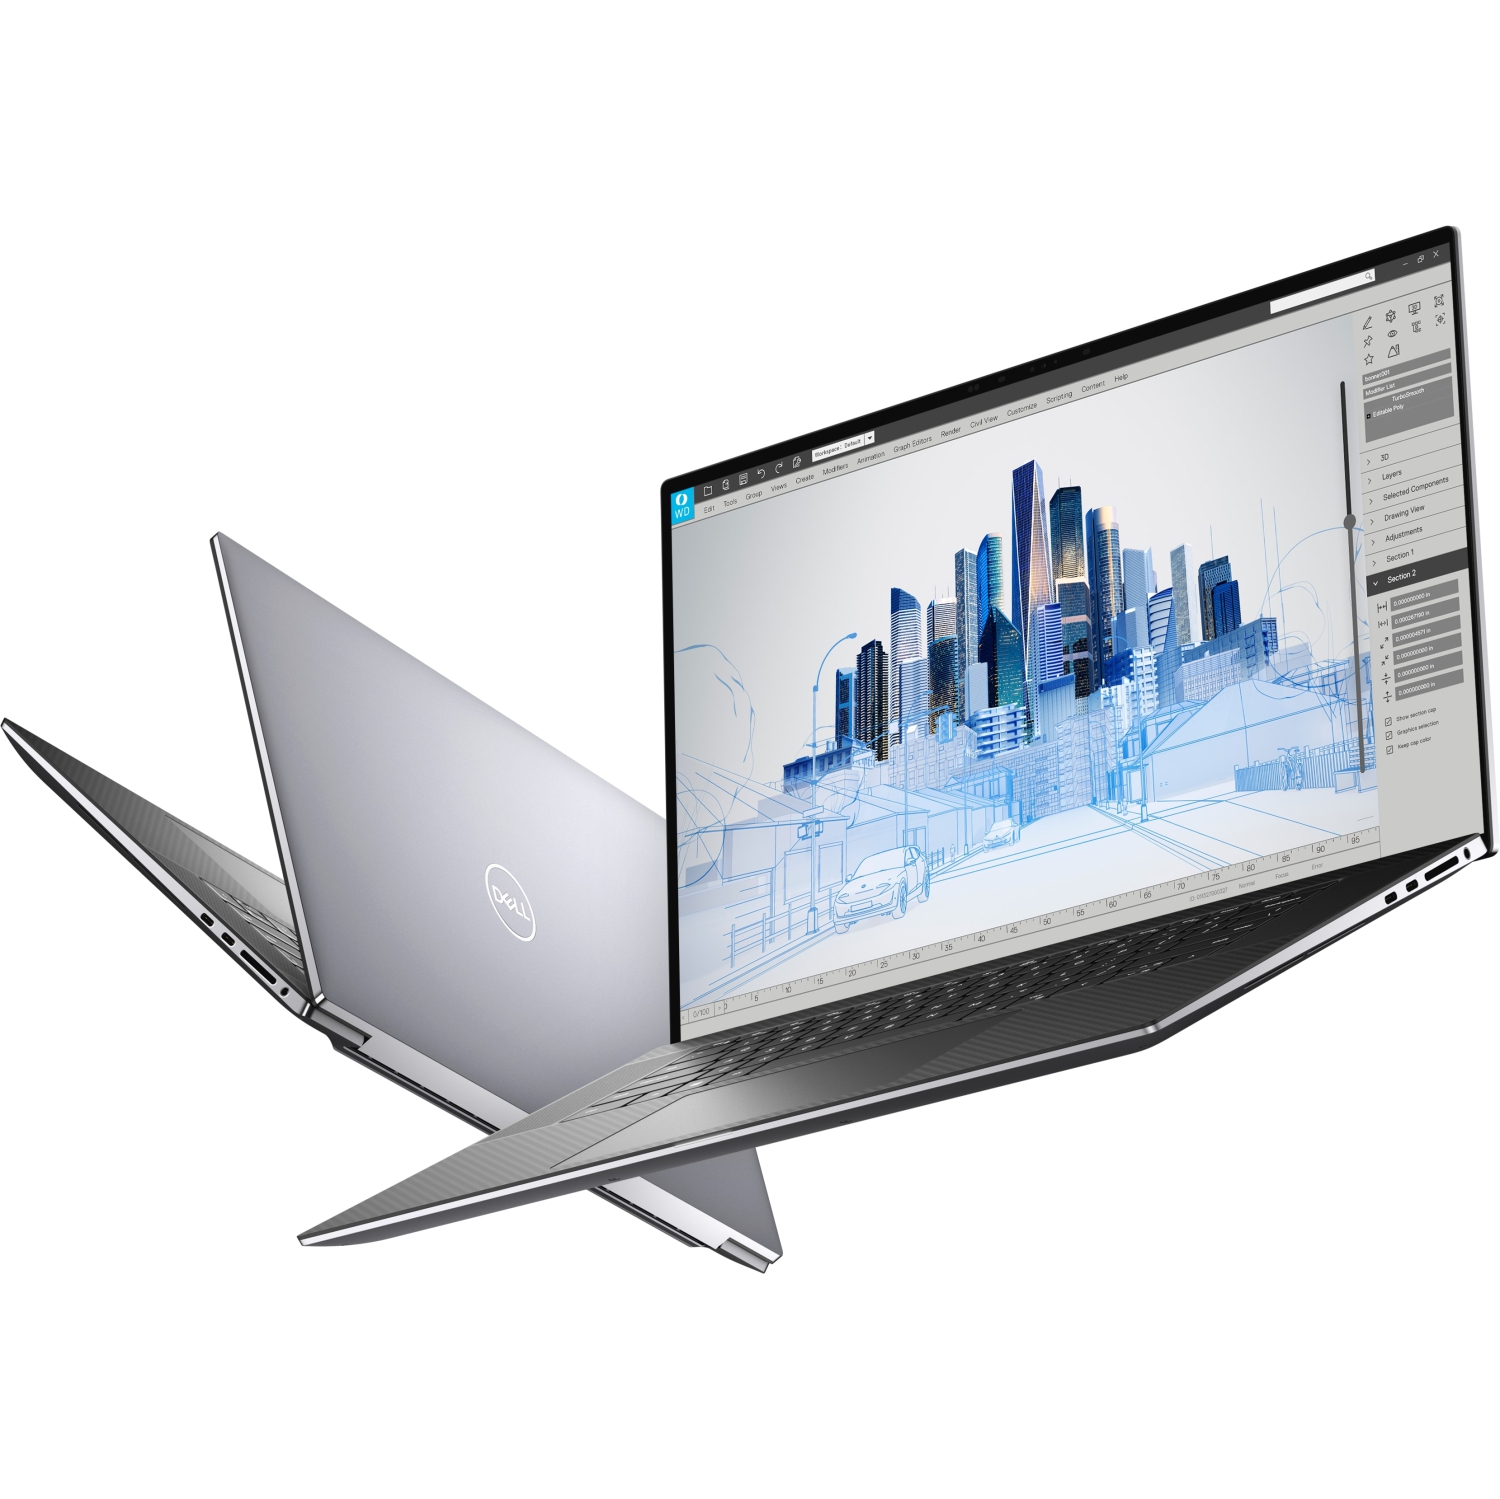 Refurbished (Excellent) - Dell Precision 5000 5760 Workstation Laptop (2021), 17" FHD+, Core i7, 2TB SSD, 32GB RAM, RTX A2000, 4.8 GHz, 11th Gen CPU Certified Refurbished